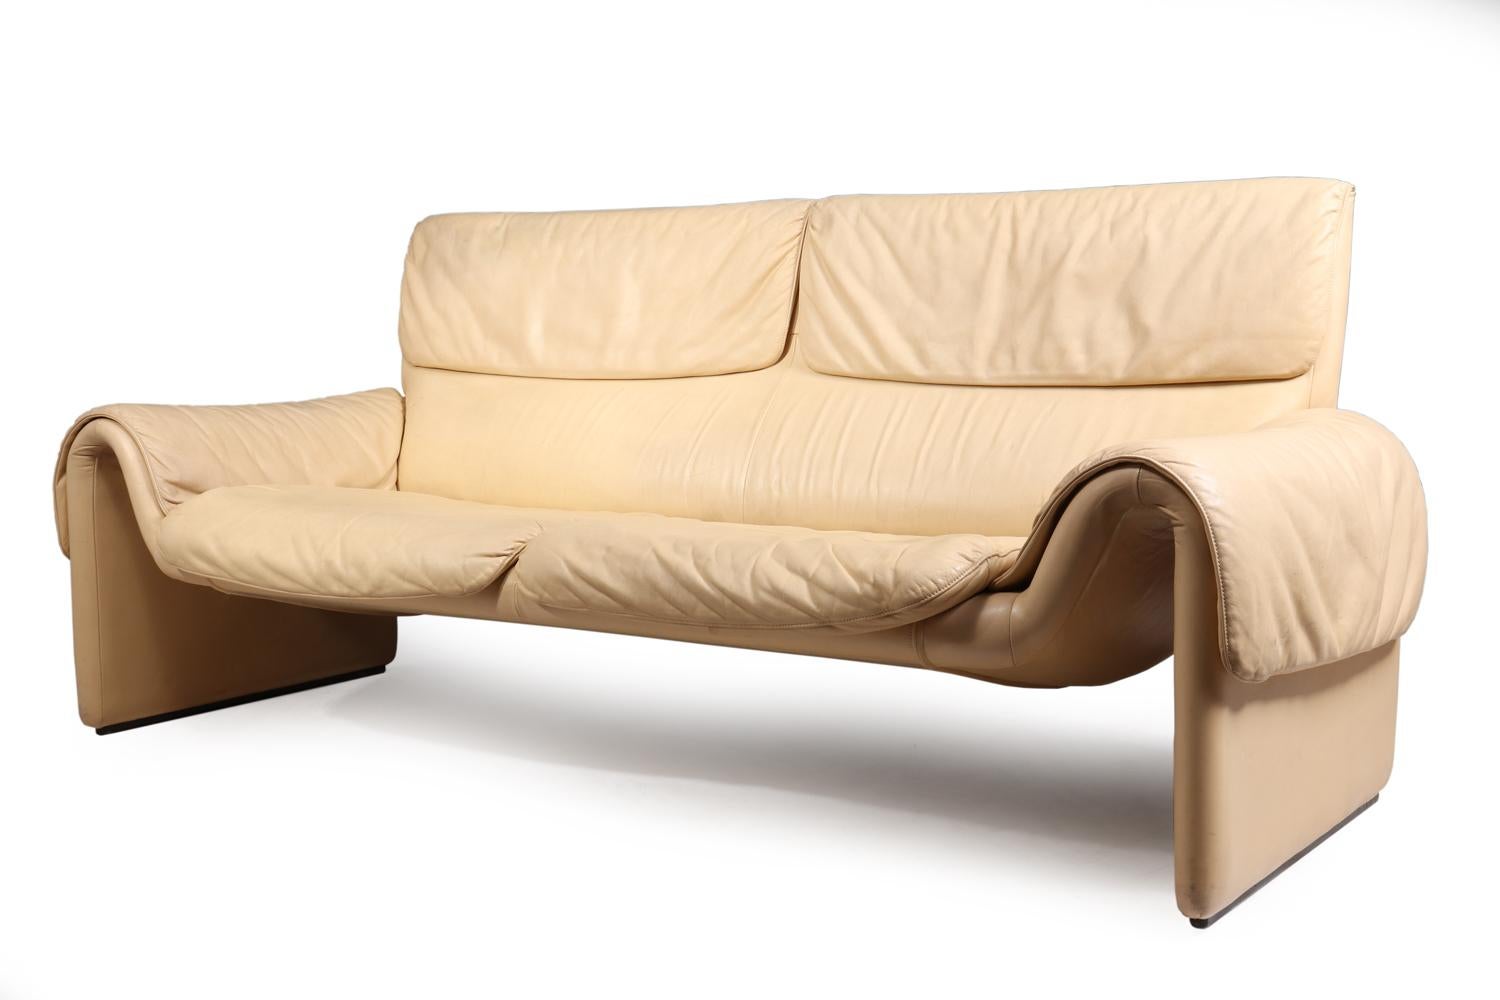 Late 20th Century Leather Sofa by De Sede DS-2011, circa 1980